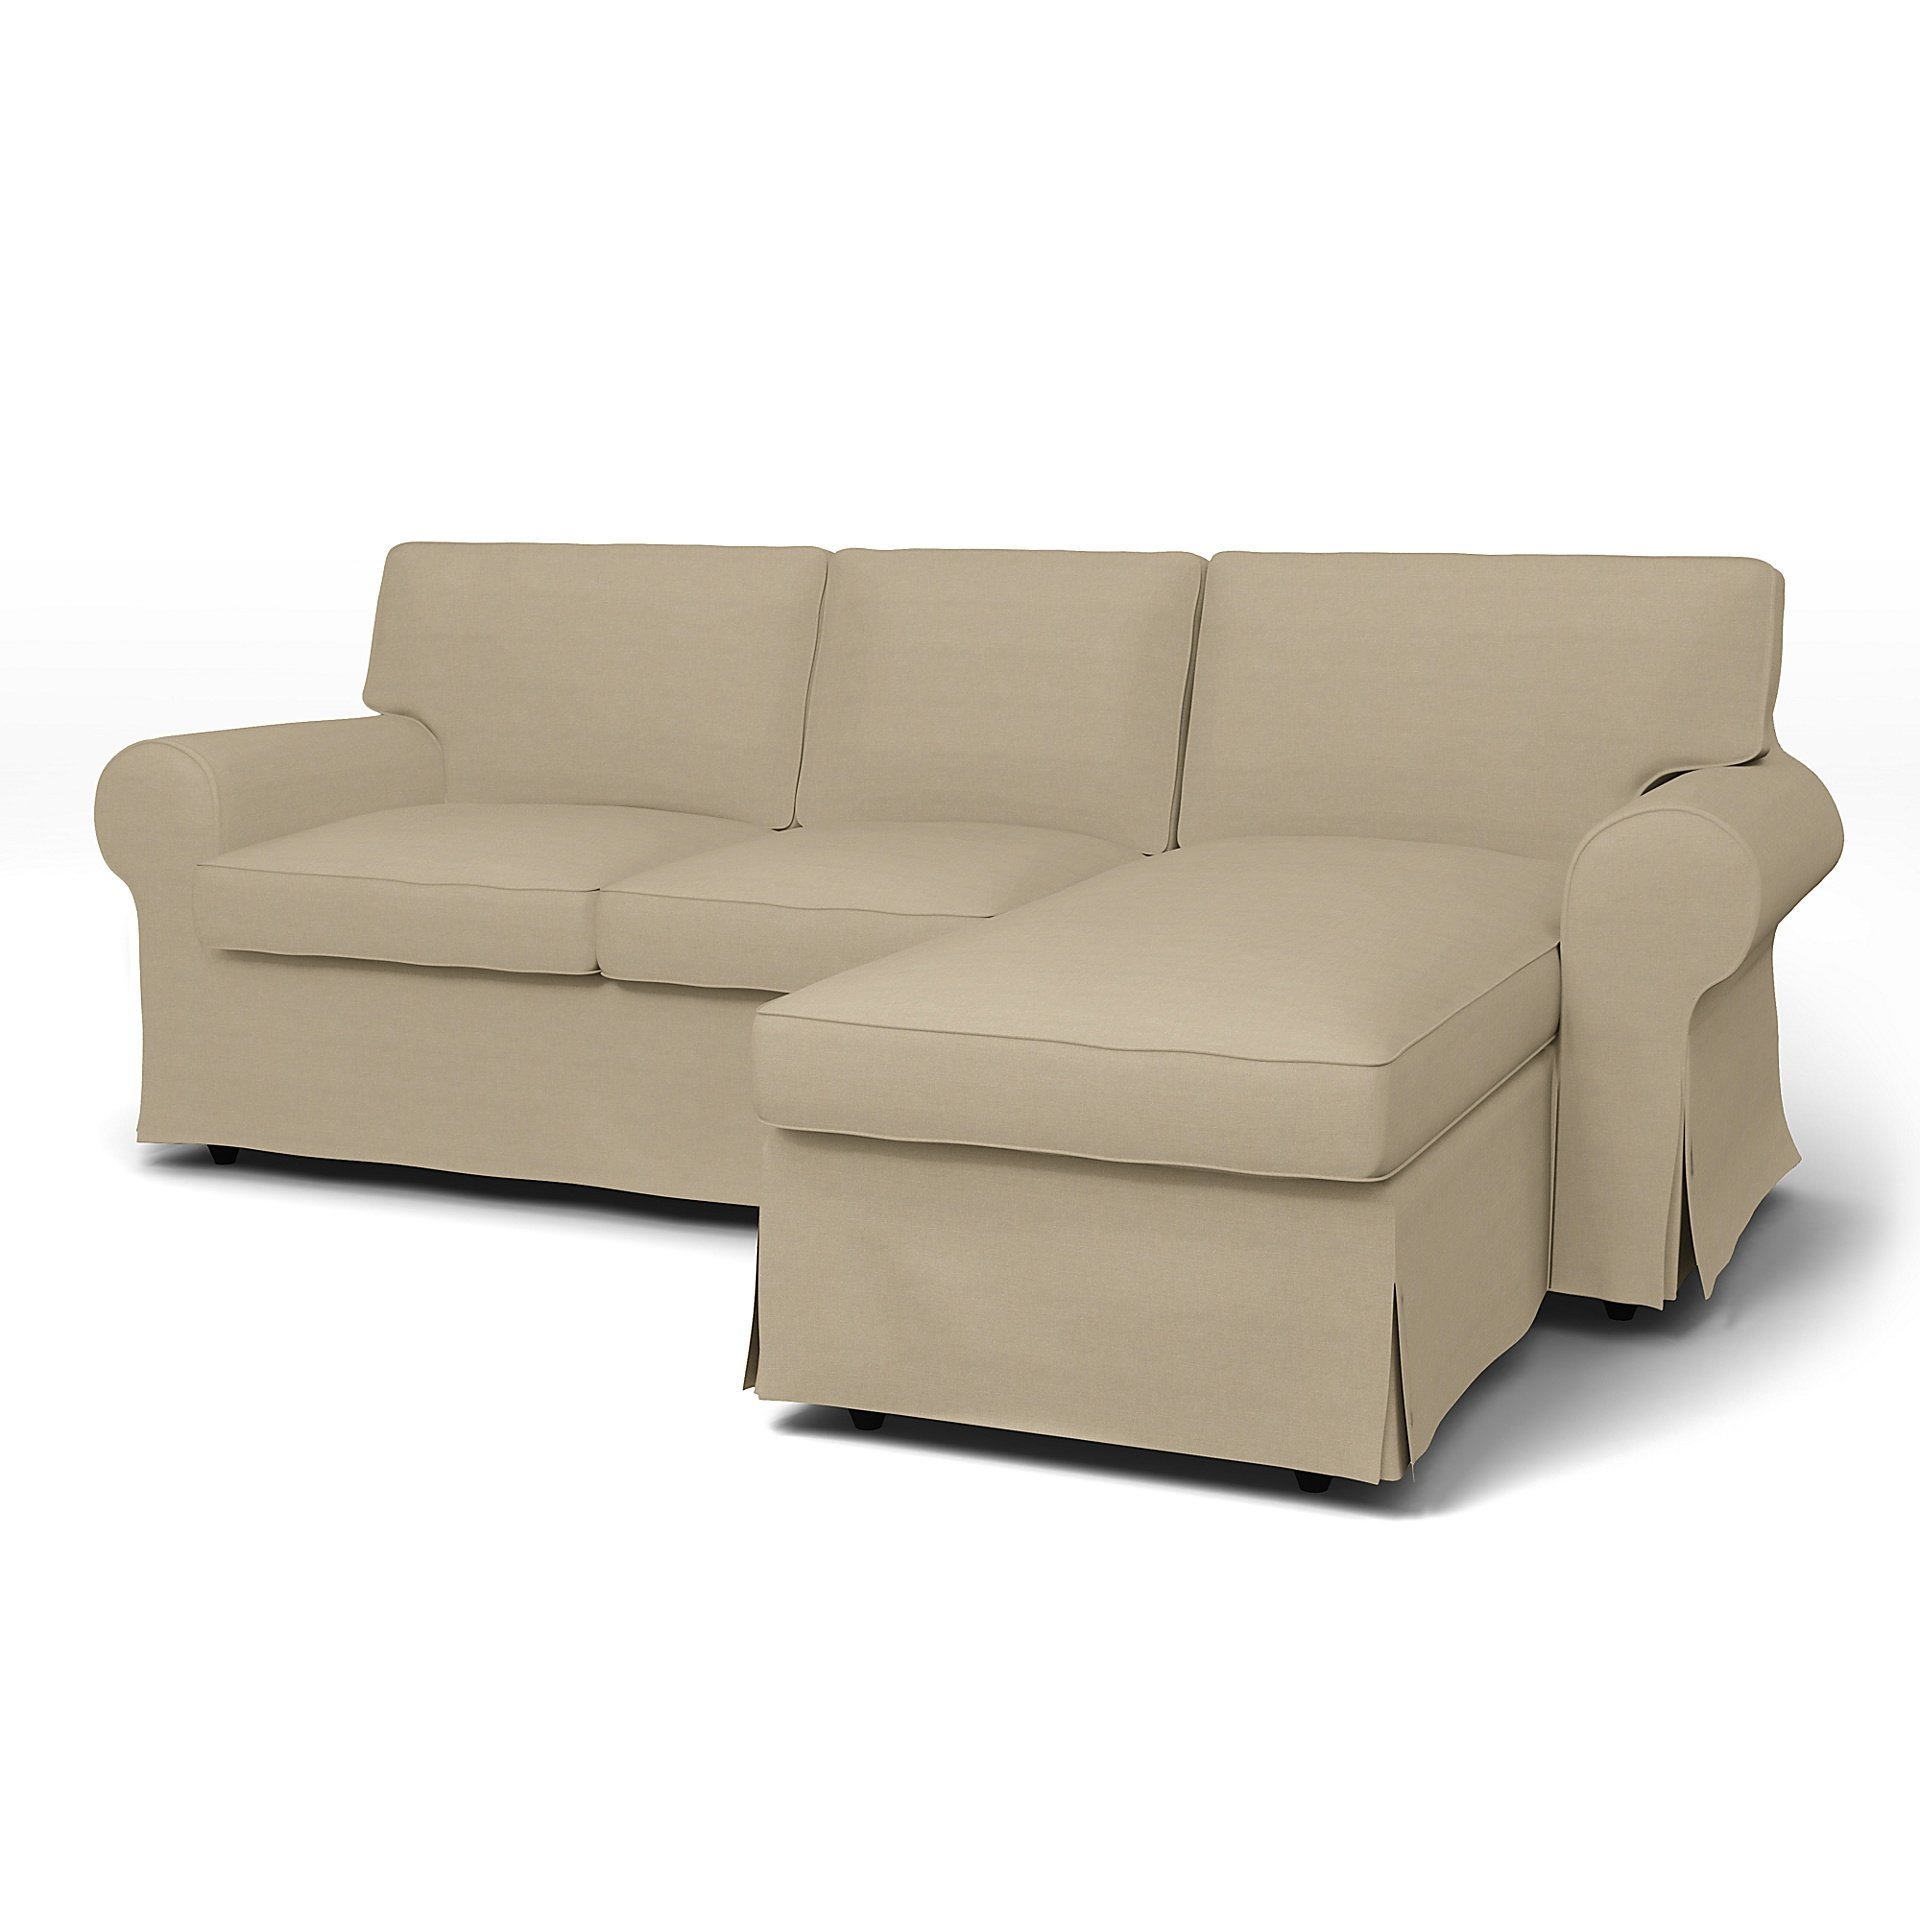 IKEA - Ektorp 3 Seater Sofa with Chaise Cover, Tan, Linen - Bemz